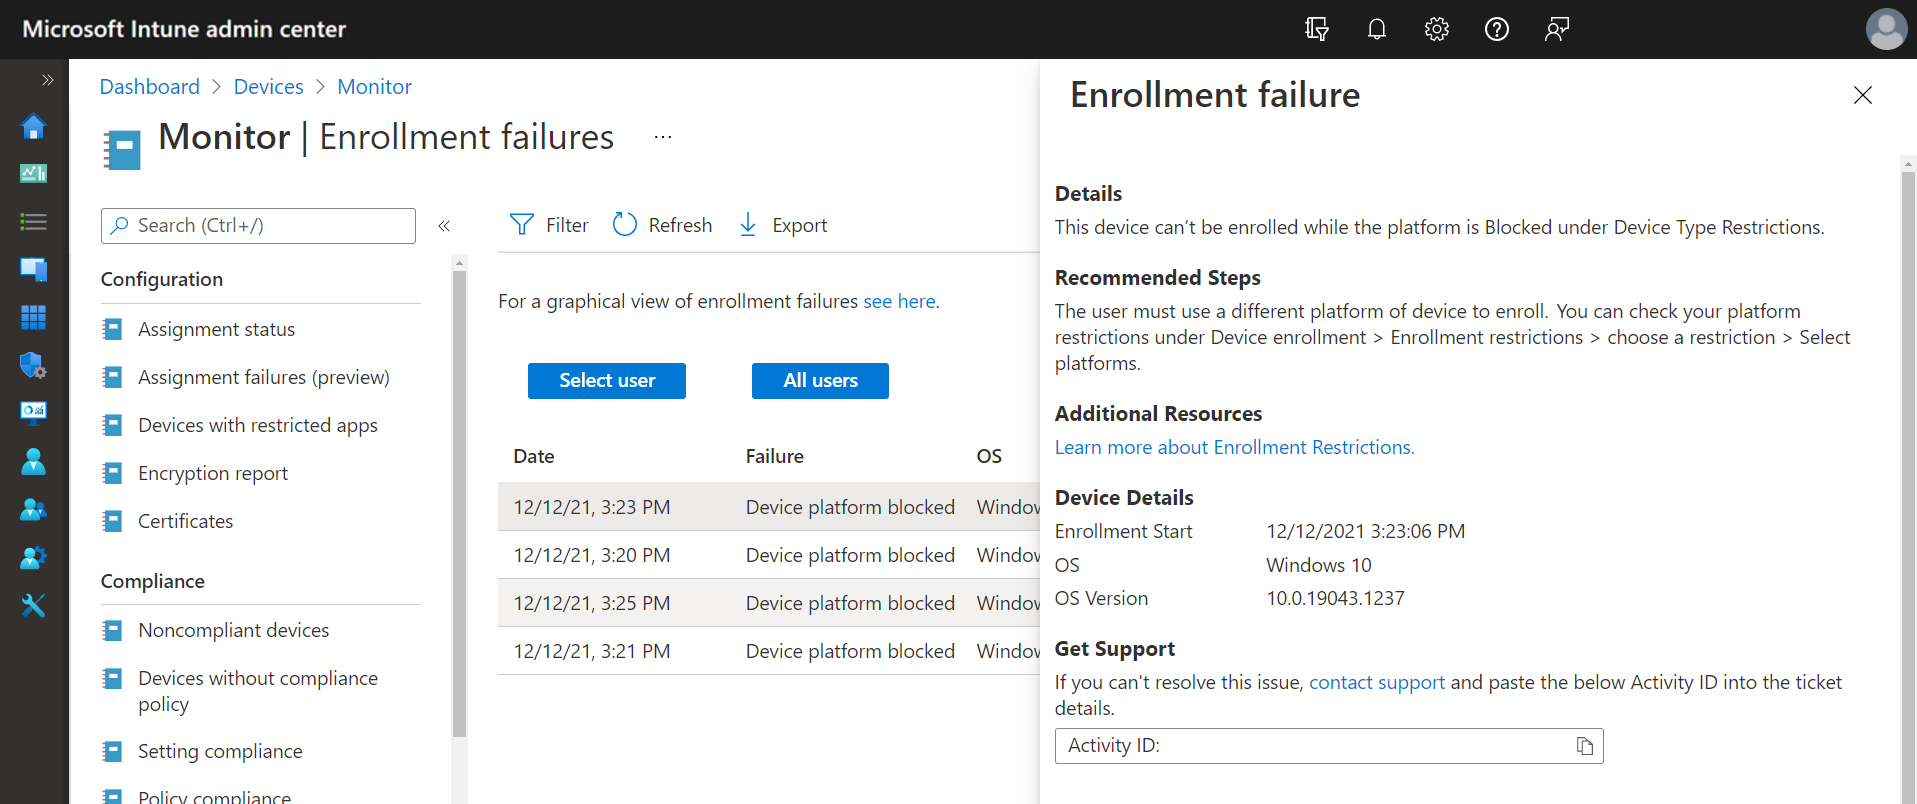 Example image of the enrollment failures report, showing the enrollment failure details for a selected row.